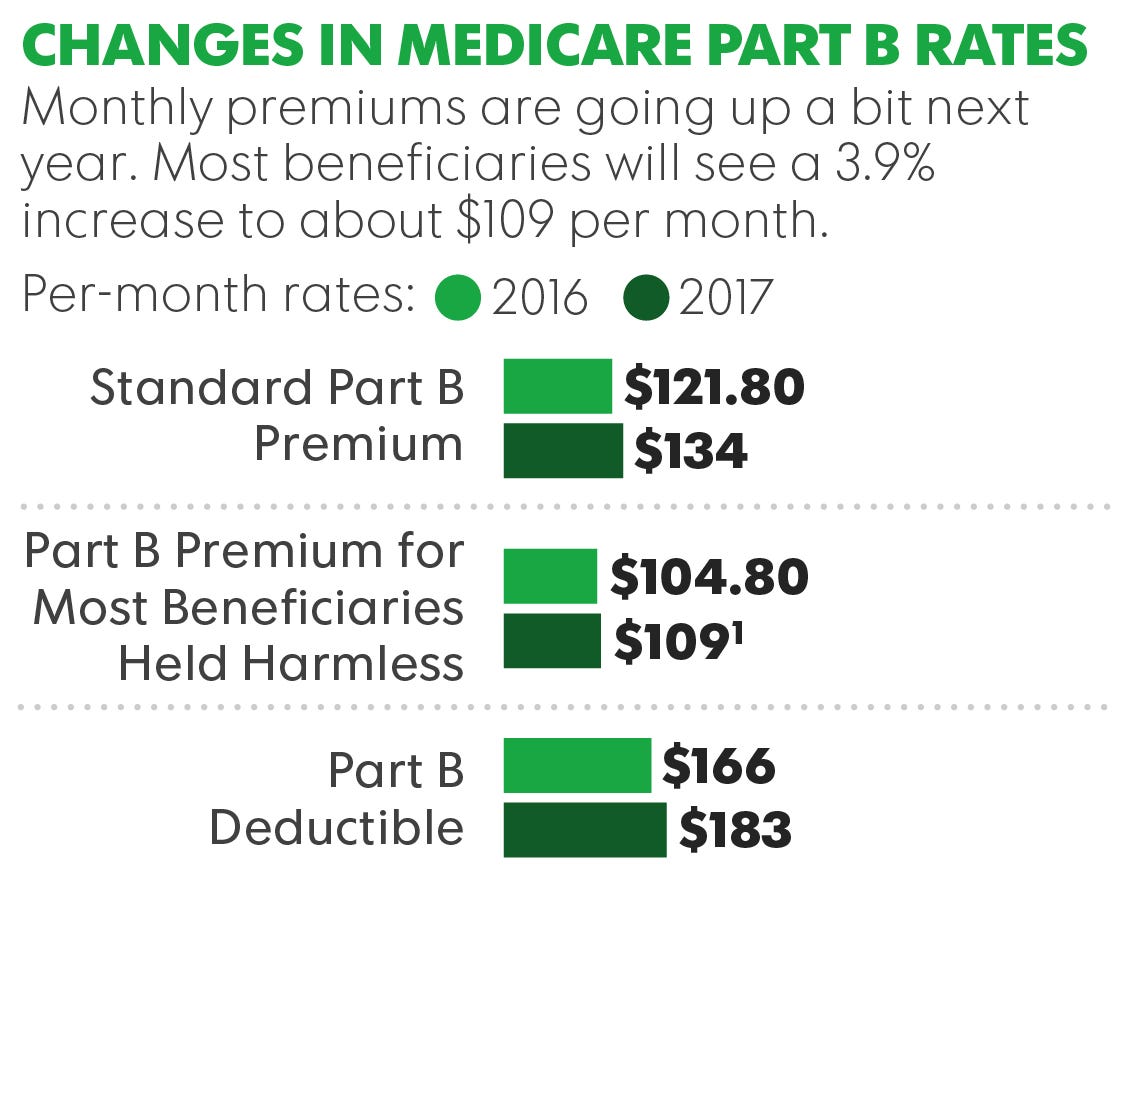 What is the average monthly premium for Medicare Part B?